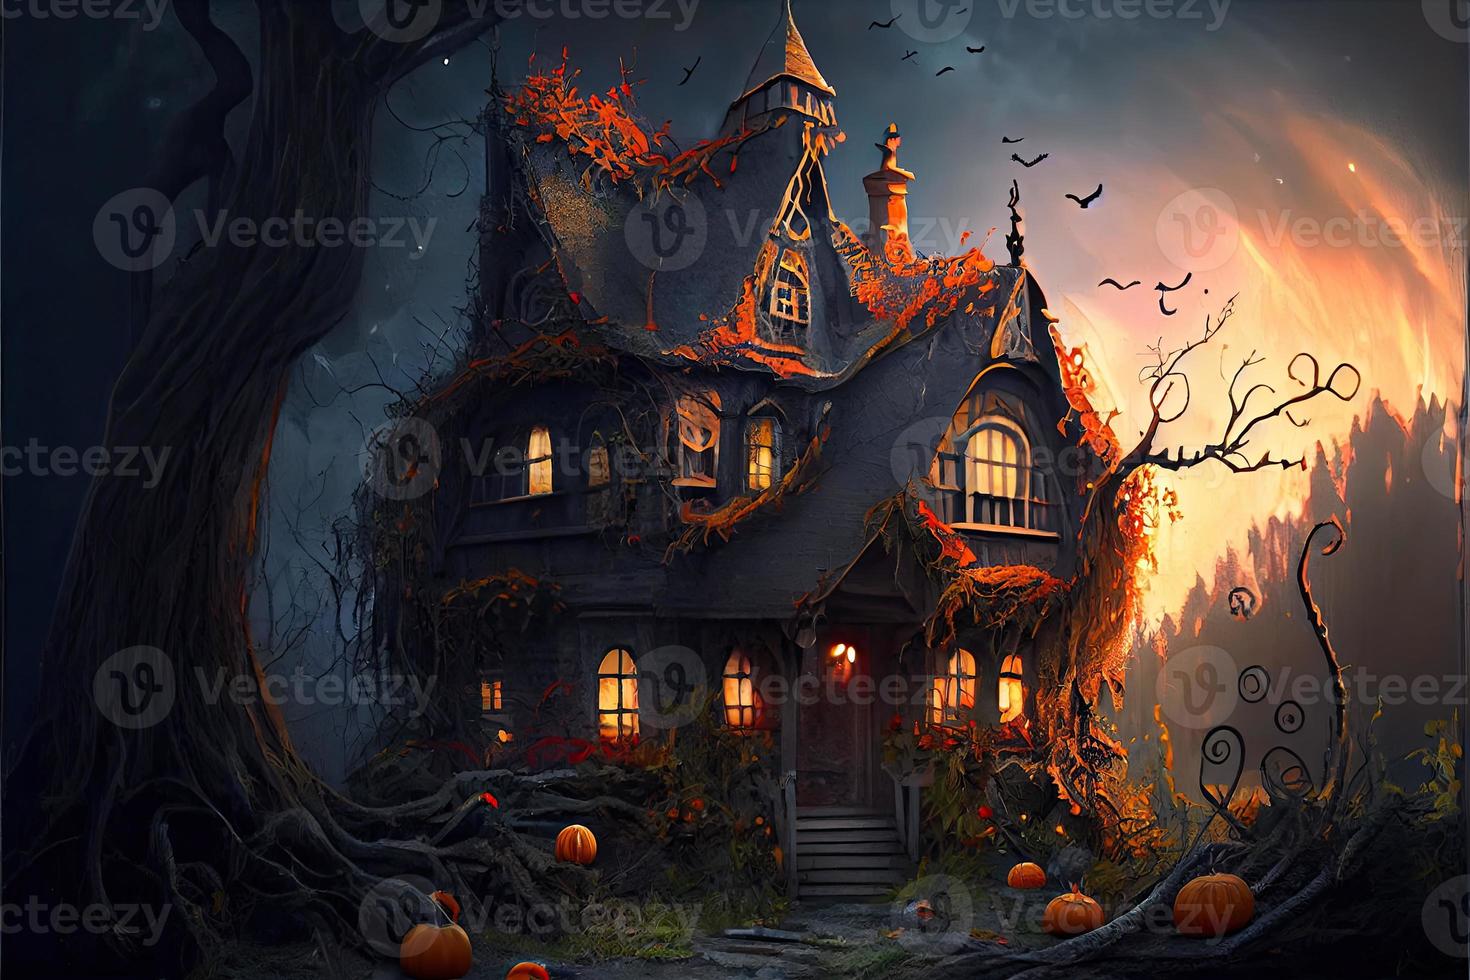 Halloween day eyes of Jack O' Lanterns trick or treating Samhain All Hallows' Eve All Saints' Eve All hallowe'en spooky Horror Ghost Demon background October 31 photo